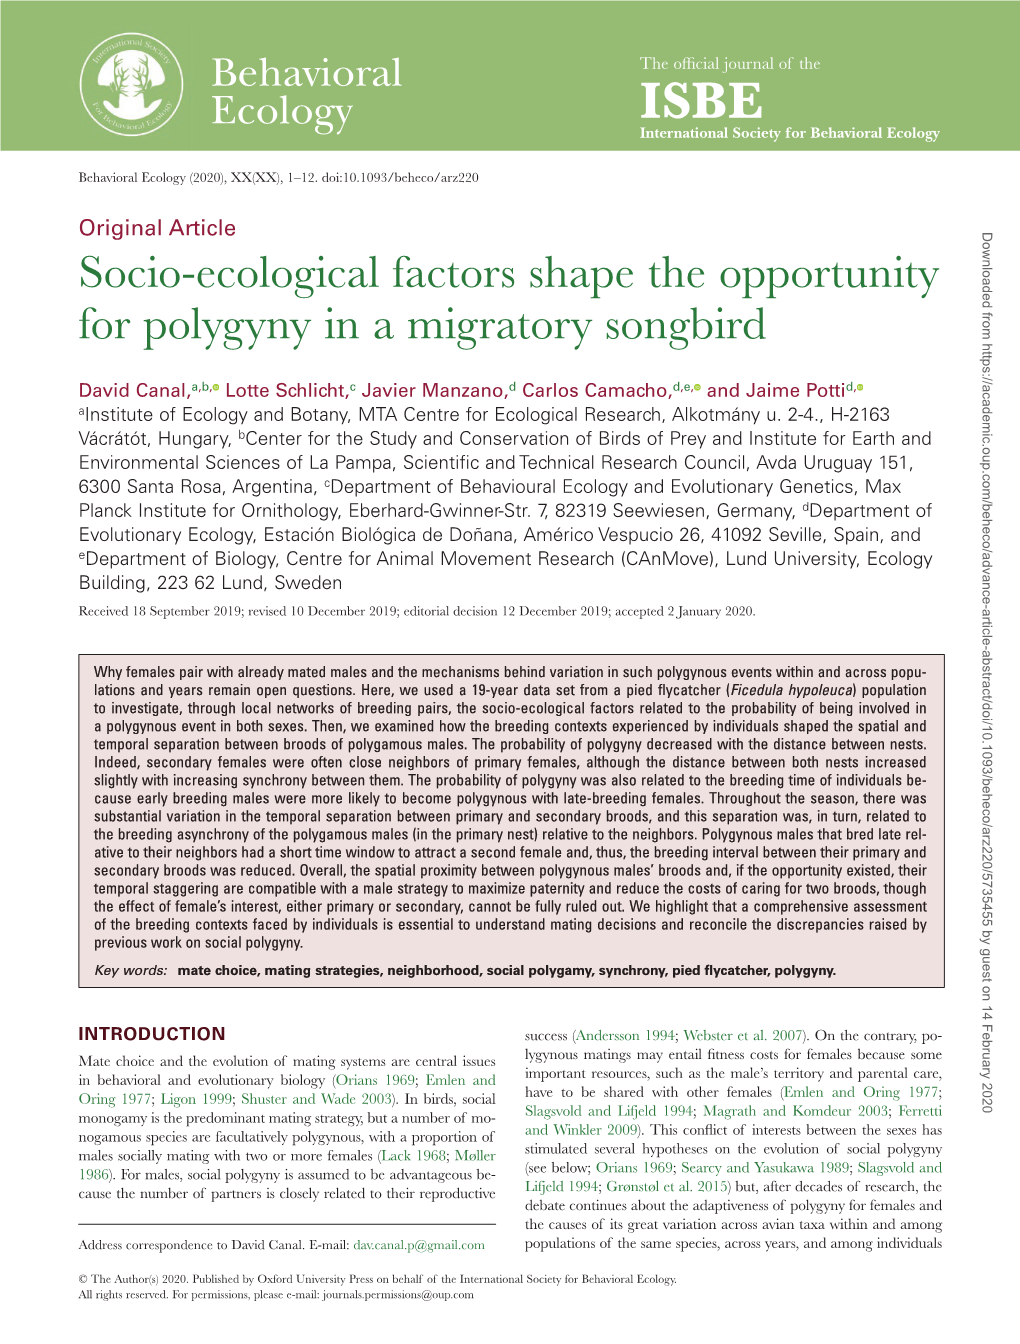 Socio-Ecological Factors Shape the Opportunity for Polygyny in a Migratory Songbird